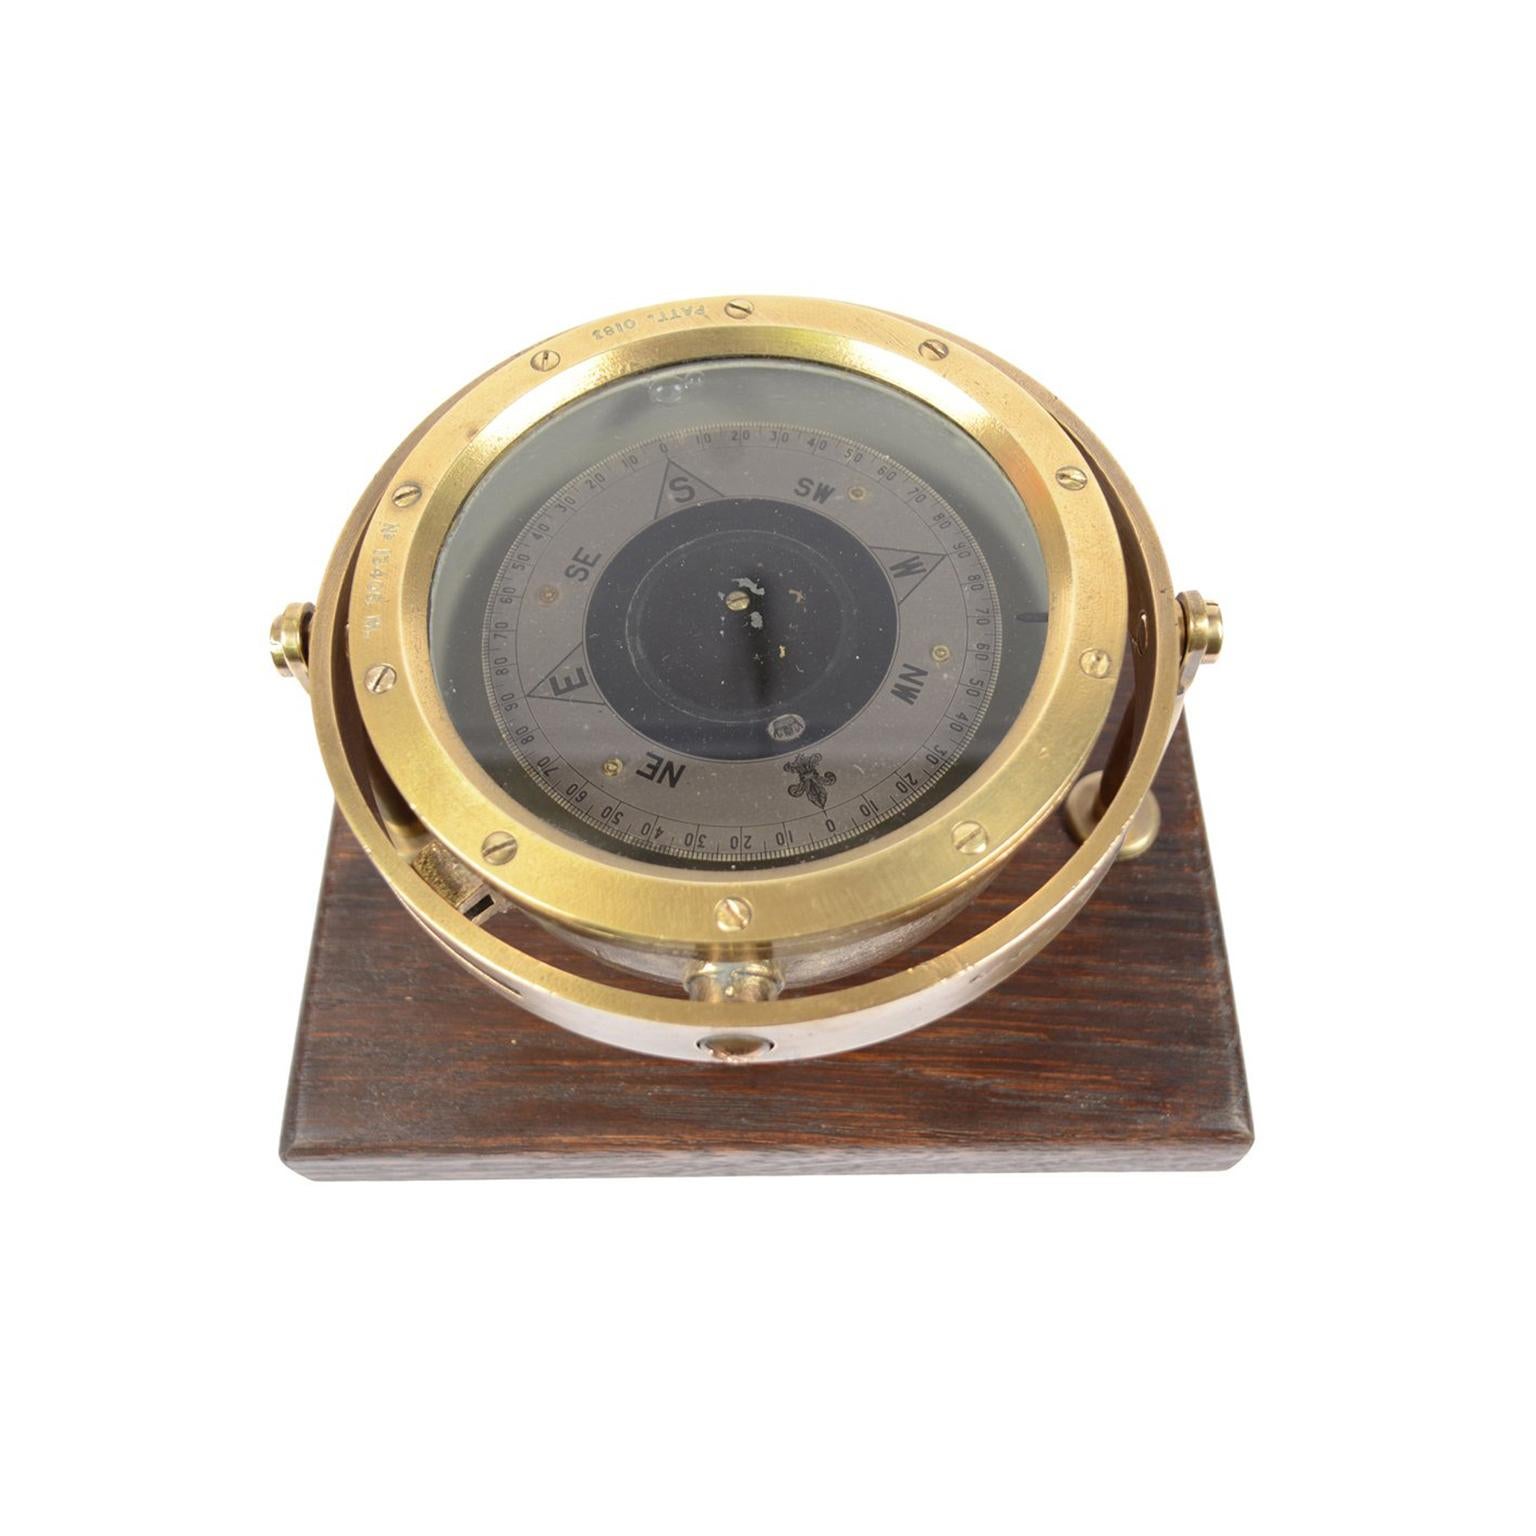 British Compass of the 1940s Brass and Bronze on a Wooden Base